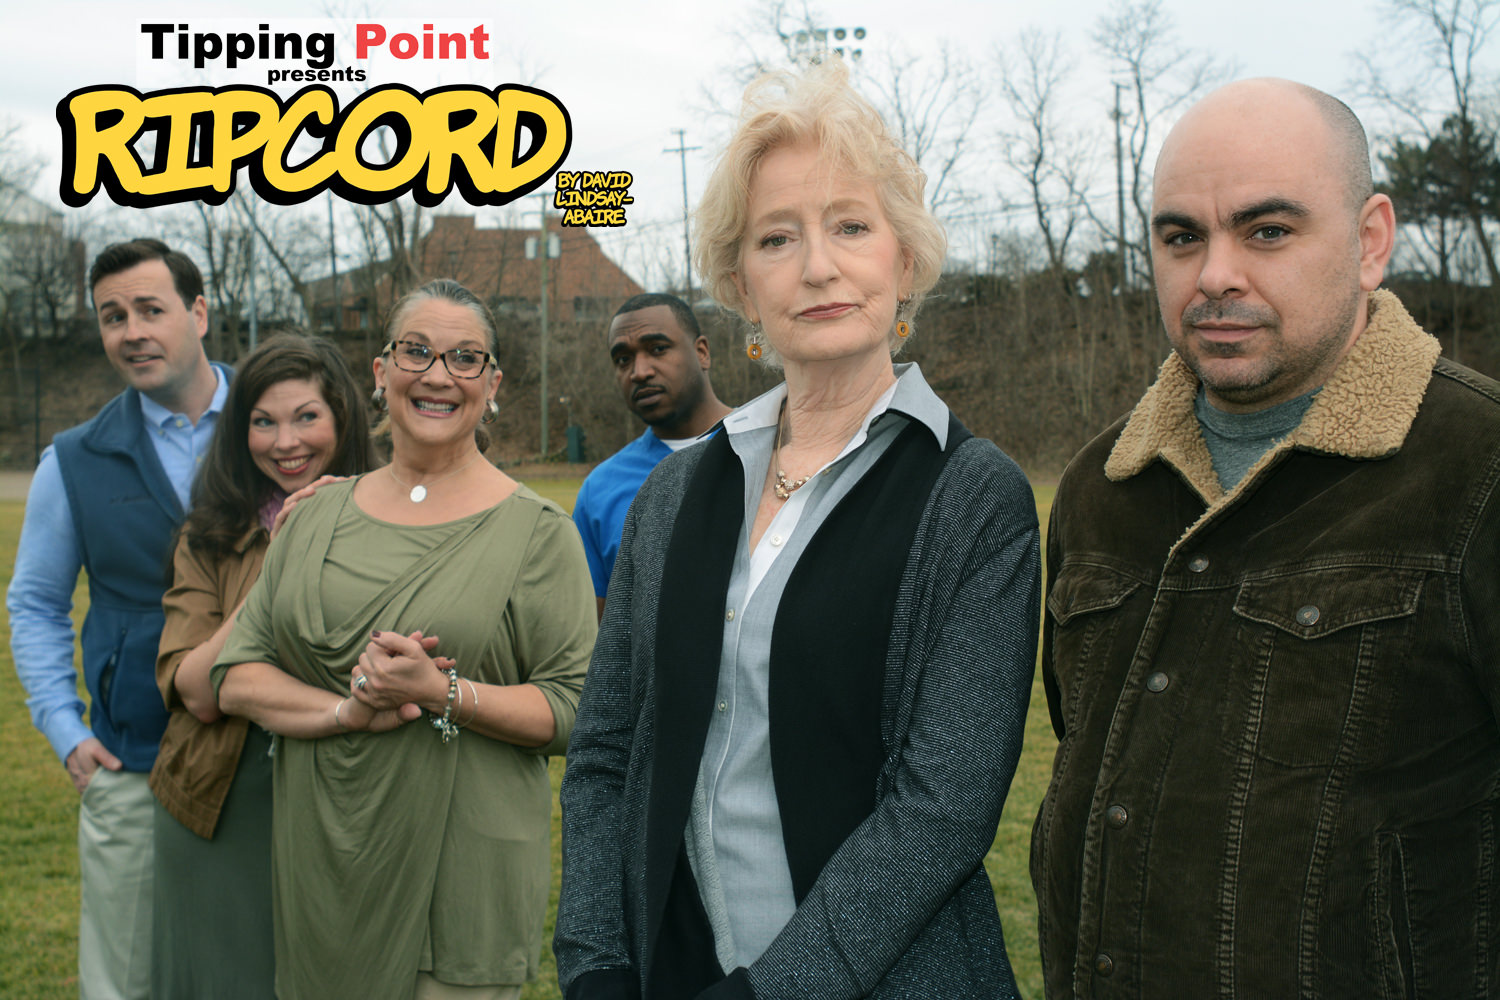 Tipping Point Theatre's production of Ripcord runs March 22 - April 22. Photo by Megan LaCroix Photography. 1